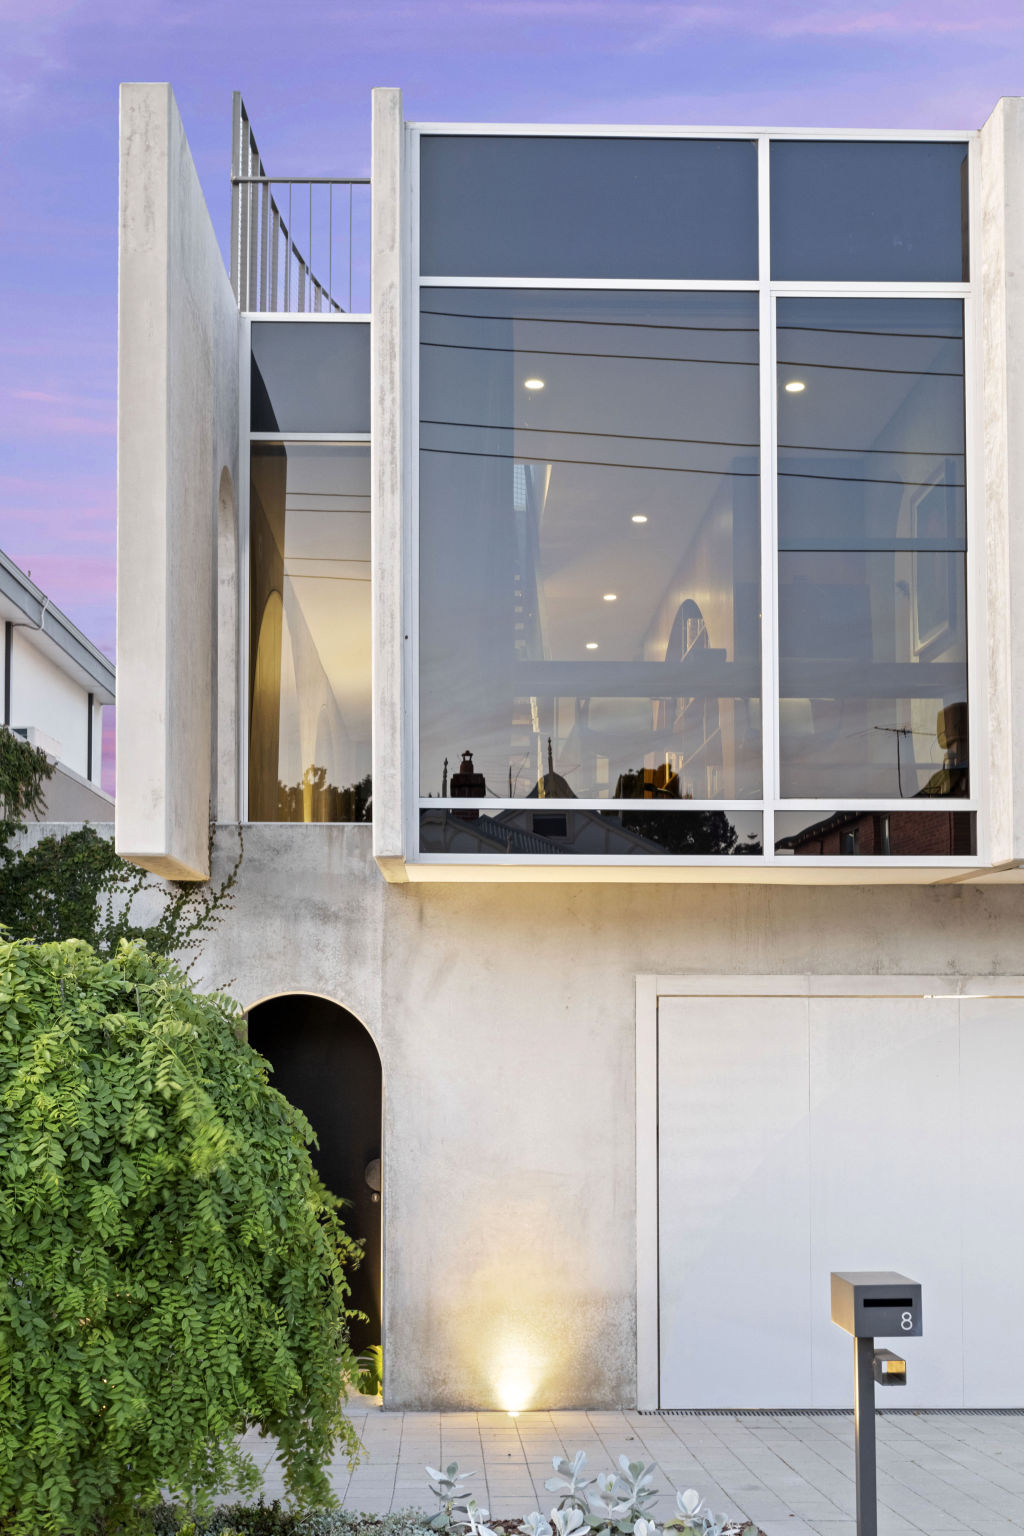 The arched entrance draws you into the property. Photo: Supplied